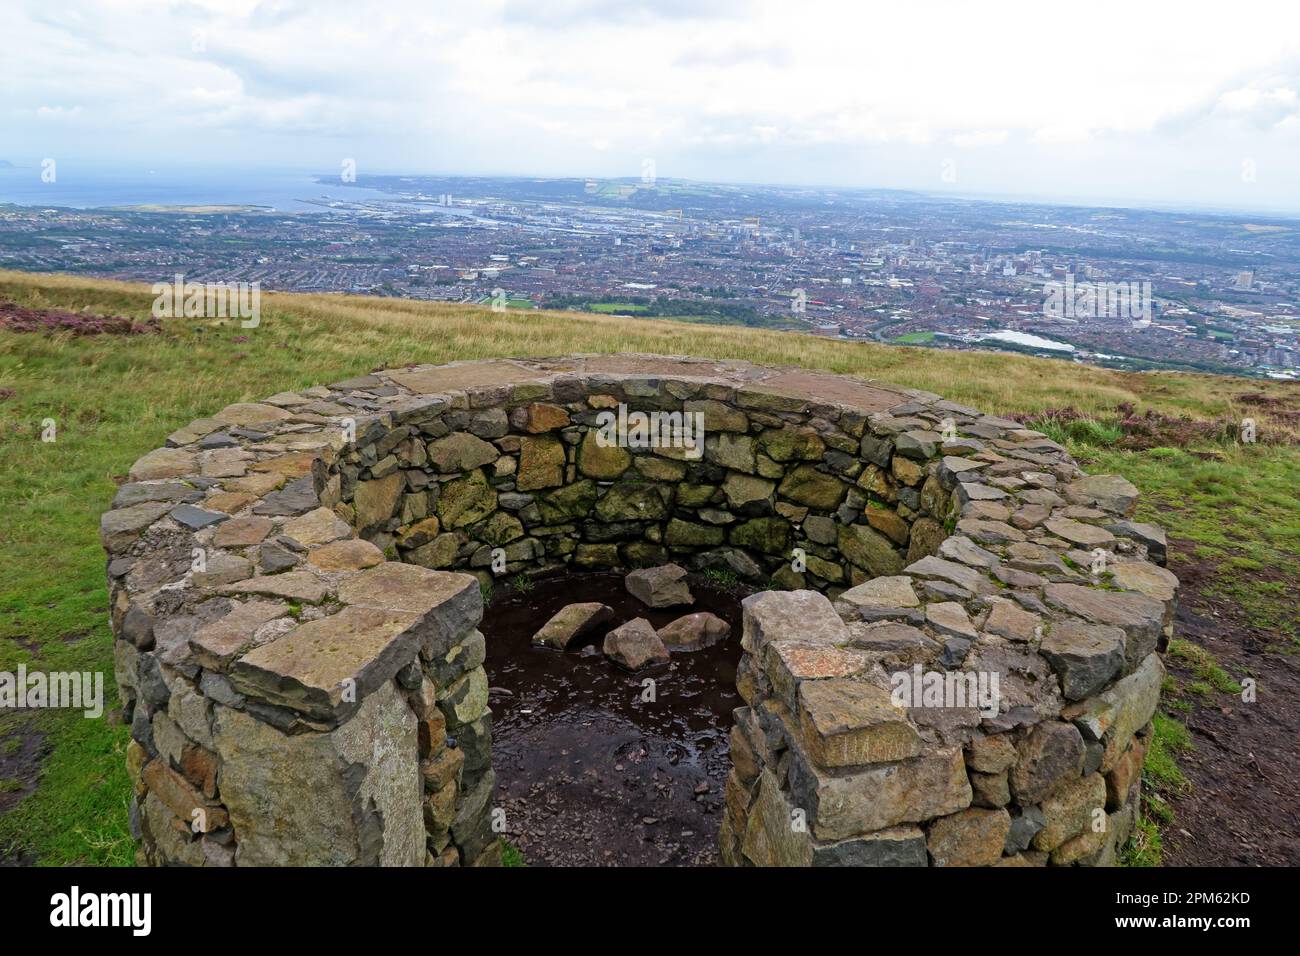 Divis black mountain / Dubhais - basalt viewpoint at the summit, looking over Belfast city, Northern Ireland, UK, BT17 0NG Stock Photo